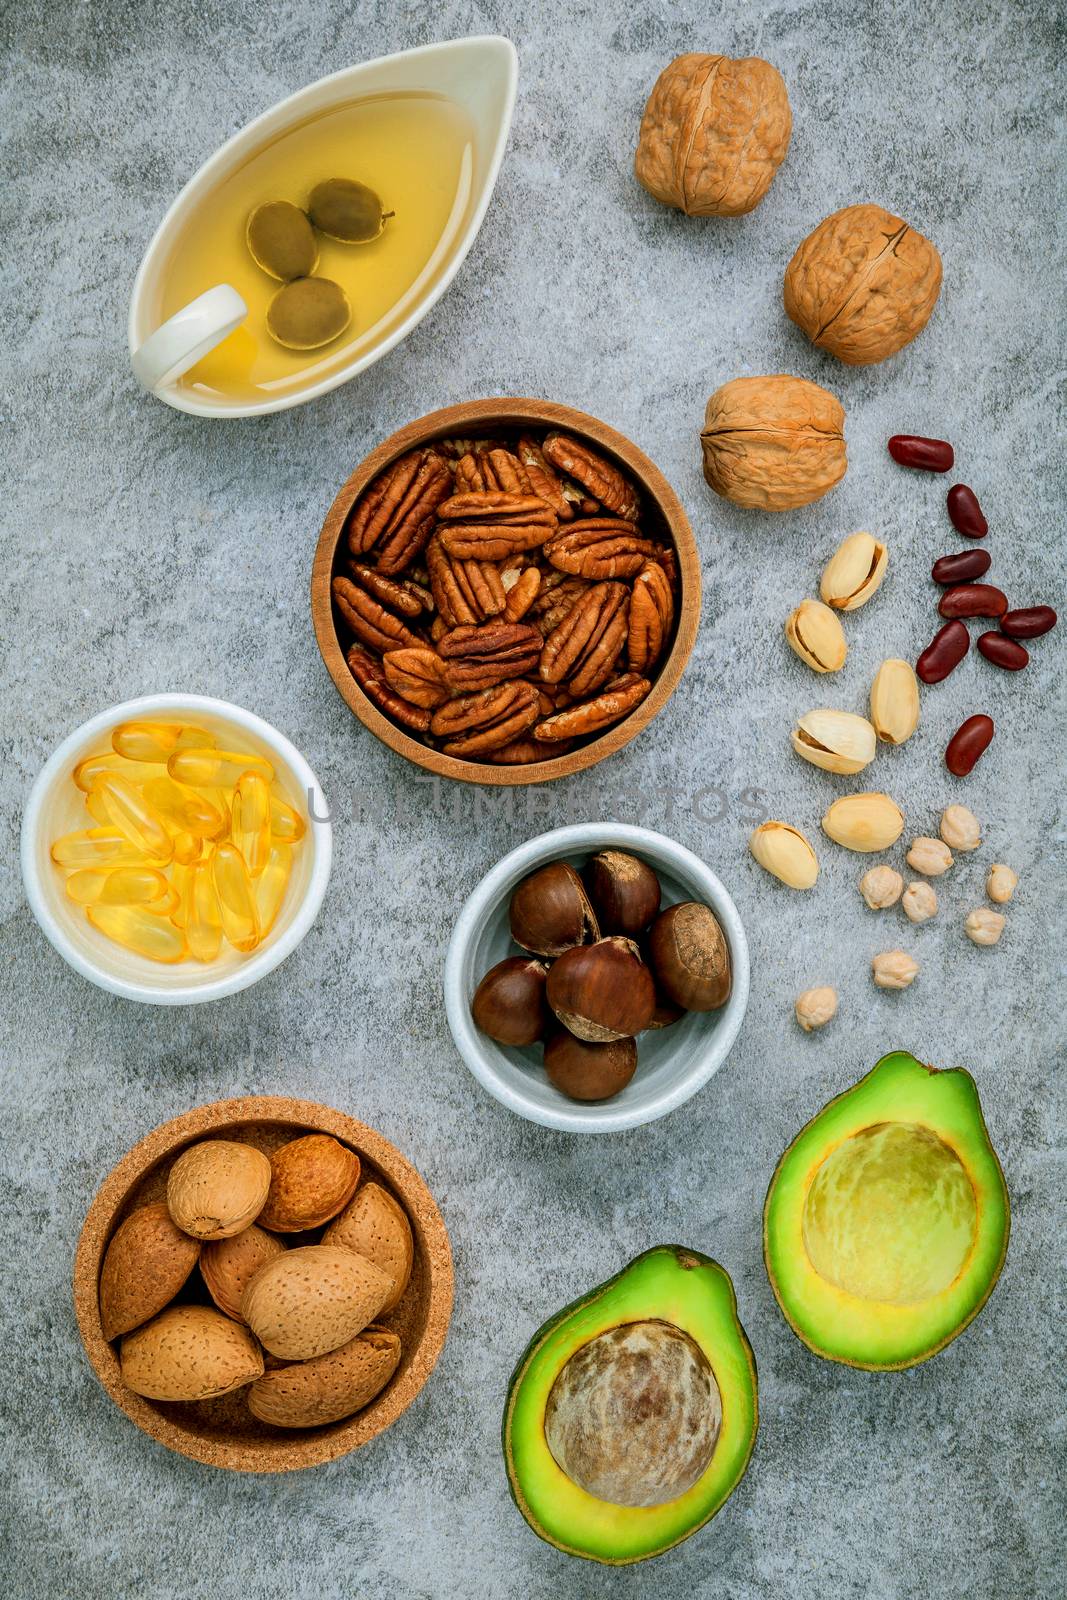 Selection food sources of omega 3 and unsaturated fats. super food high omega 3 and unsaturated fats for healthy food. Almond ,pecan ,hazelnuts,walnuts ,olive oil ,fish oil and avocado .